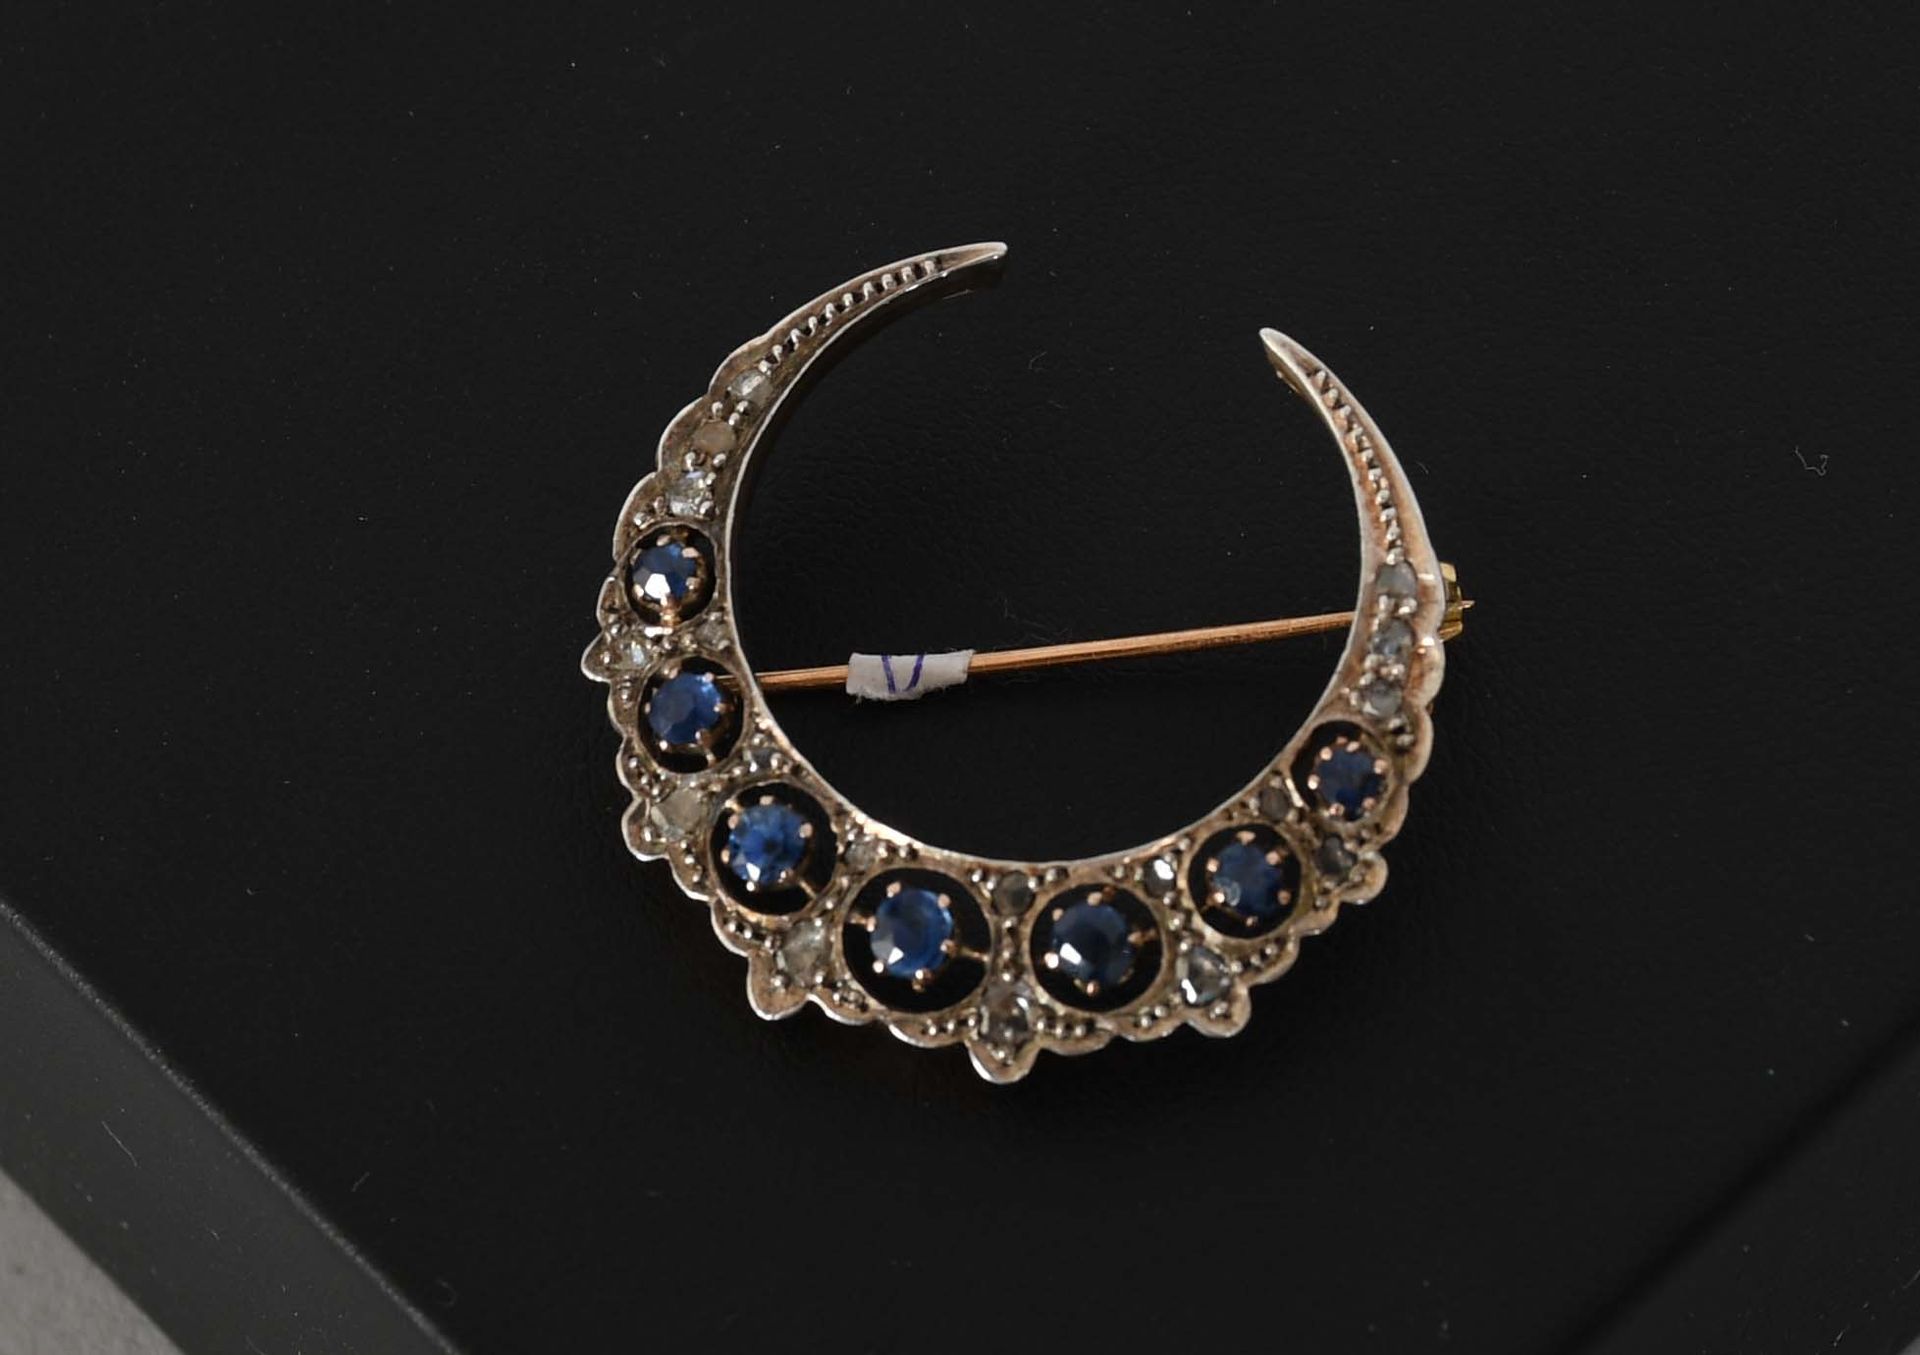 Null Jewel

Old brooch in the shape of a crescent moon, in yellow gold and silve&hellip;